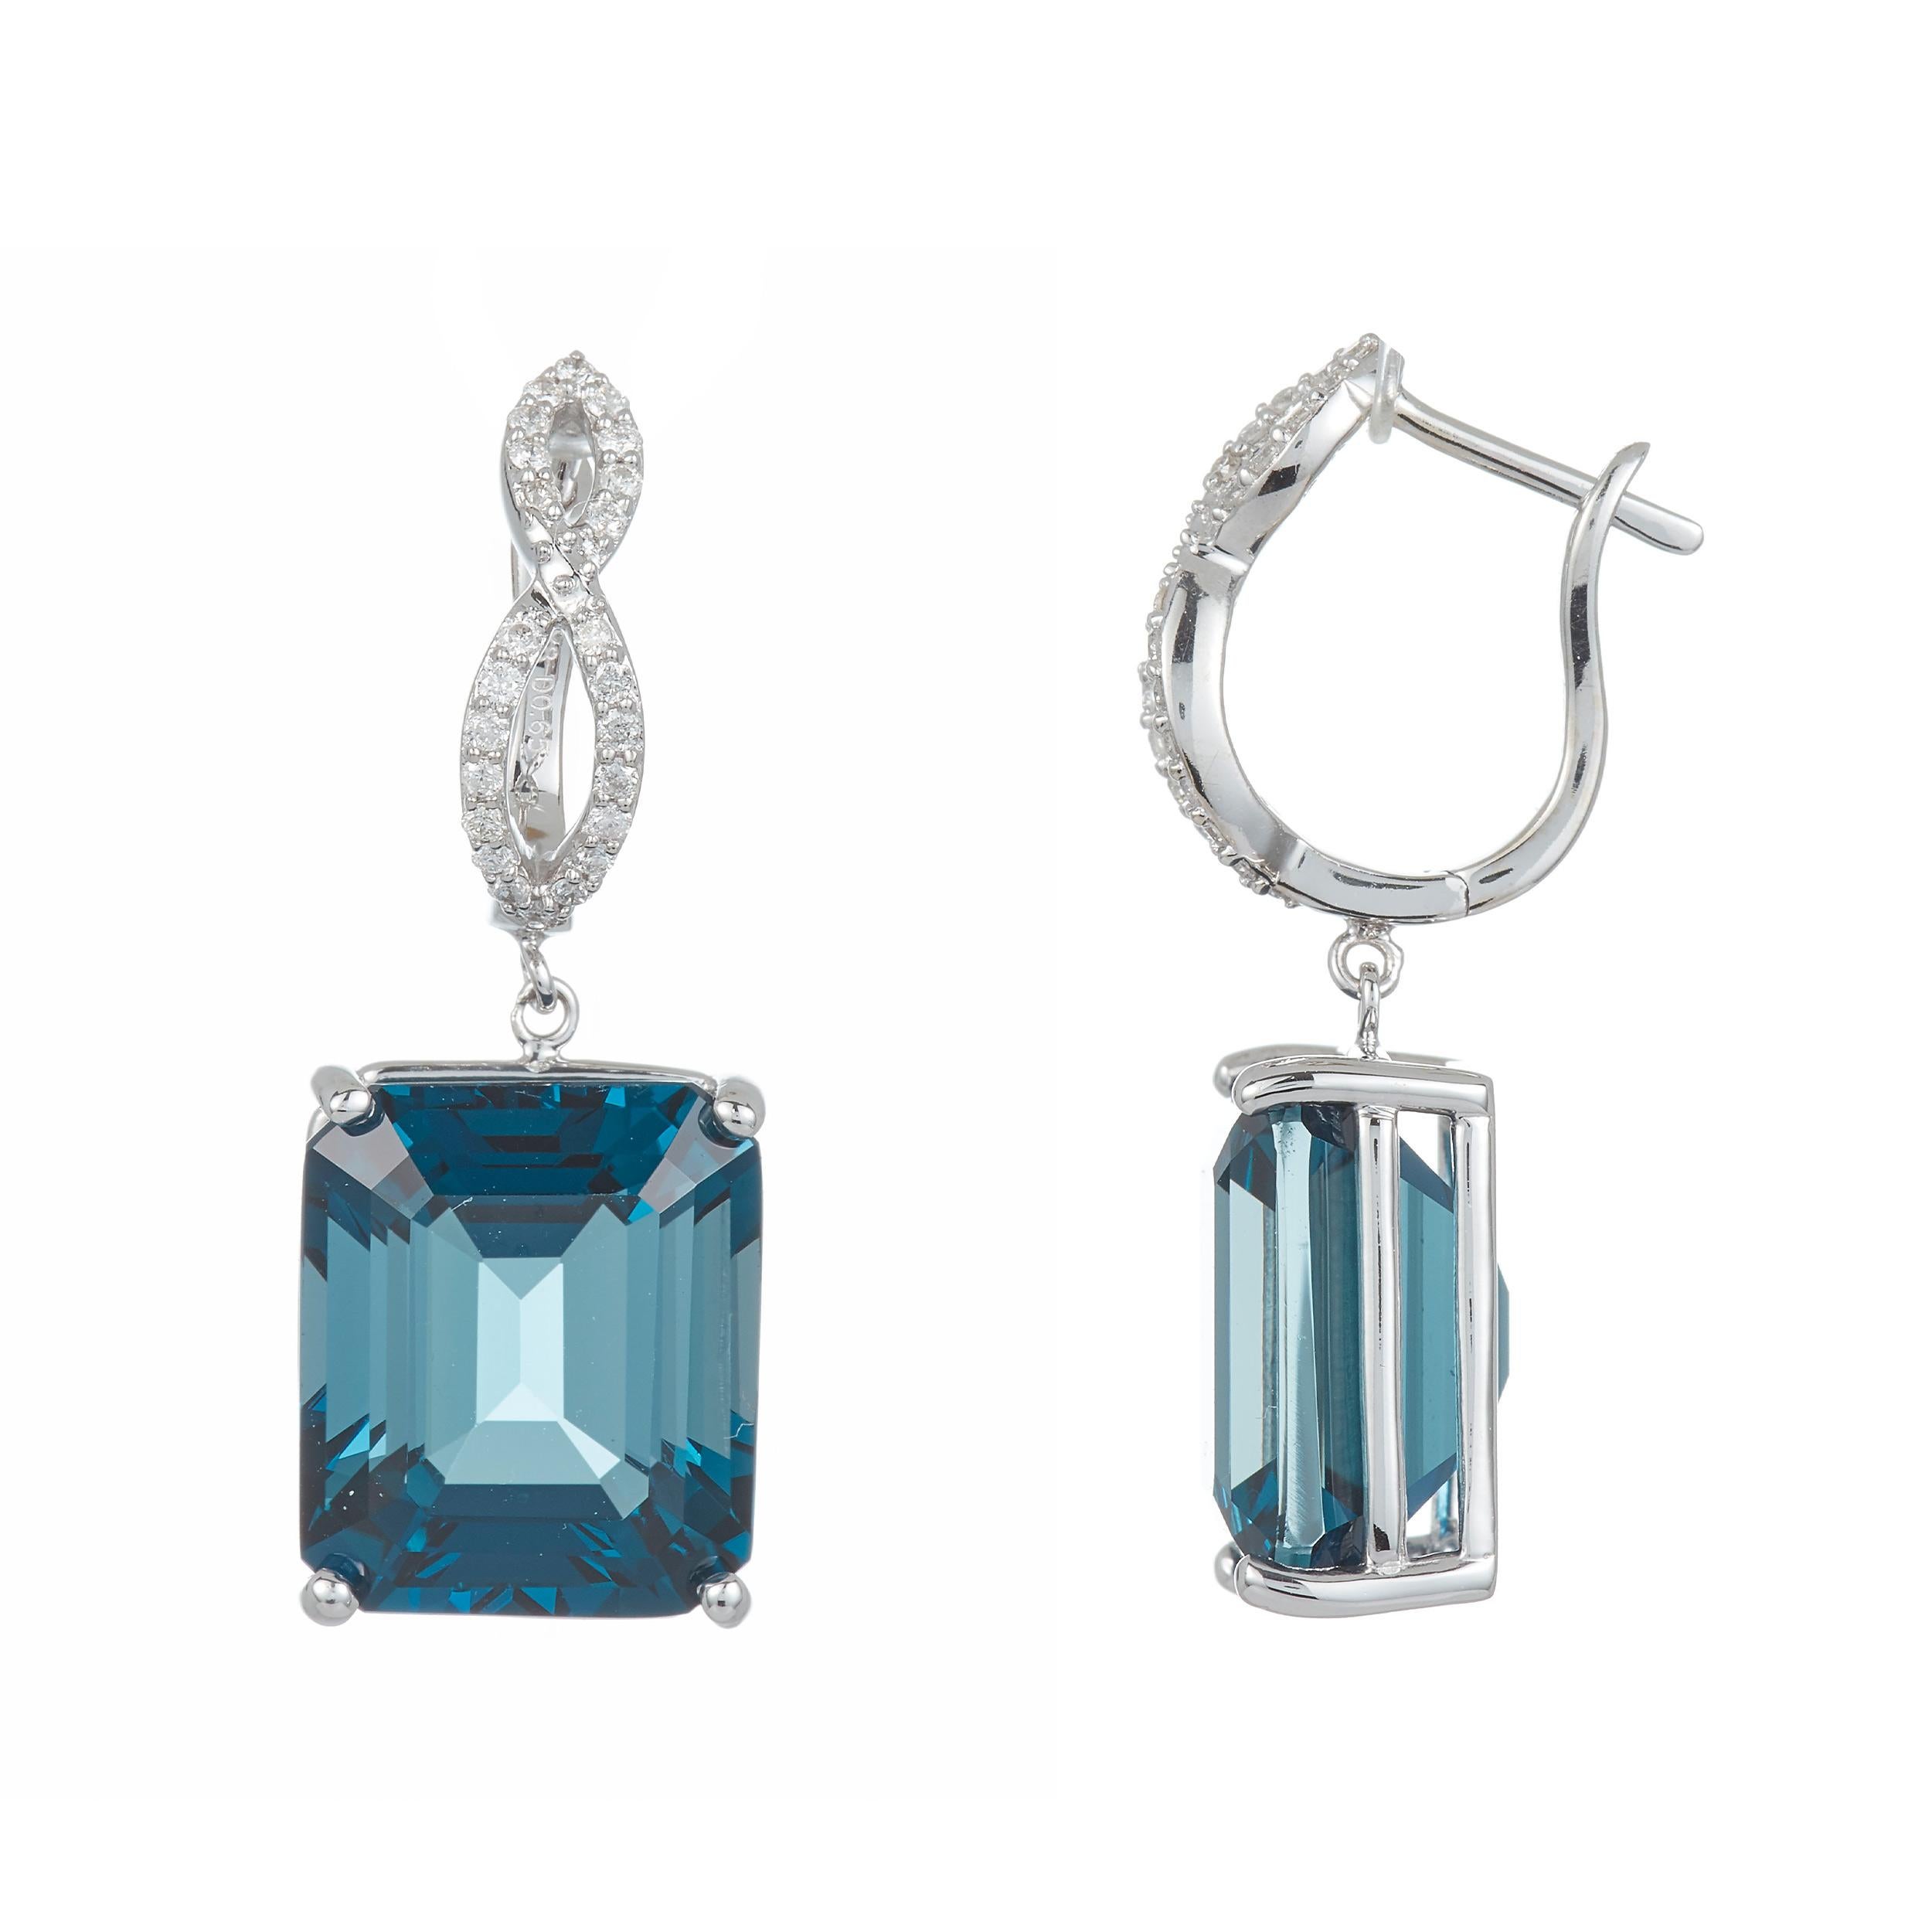 Stones: 2 Emerald Cut Blue Topaz at 24.15 Carats Total Weight
Accent Stones: 48 Round Brilliant Diamond at 0.40 Carats Clarity: SI / Color: H-I
Metal: 14K White Gold

Fine one-of-a-kind craftsmanship meets incredible quality in this breathtaking